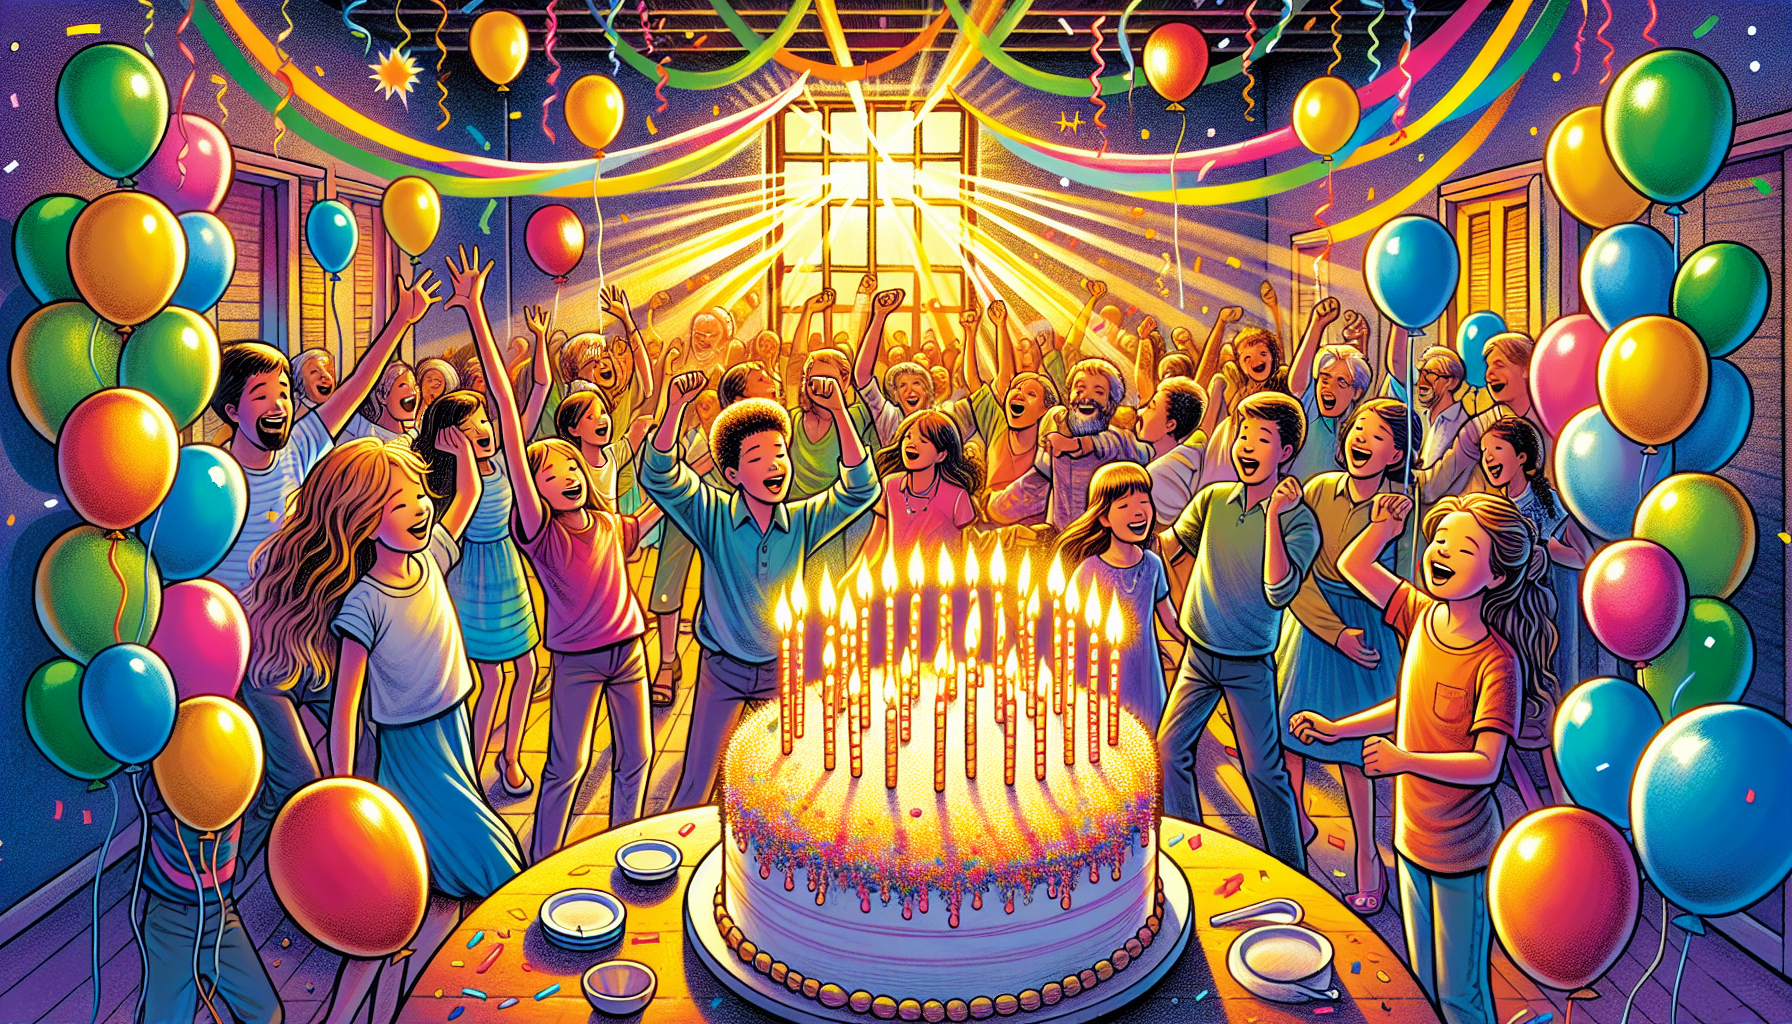 Vibrant scene of a festive birthday celebration in the Dominican Republic with people of diverse ages joyfully singing popular Christian birthday songs, decorated with colorful balloons and streamers,